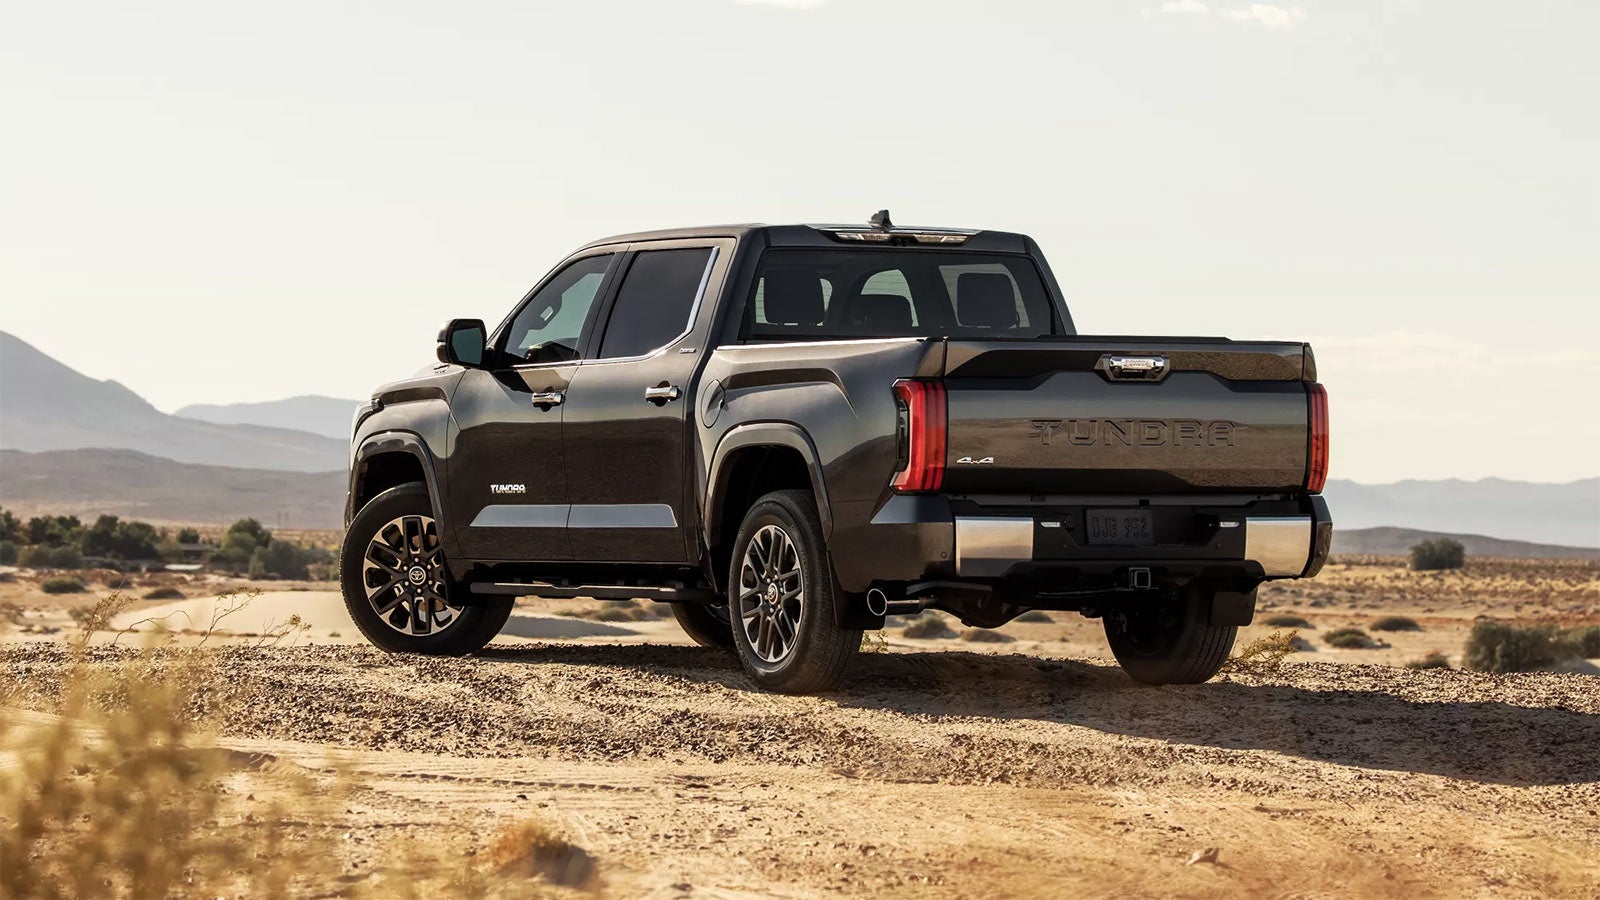 2022 Toyota Tundra Gallery | Lake Toyota in Devils Lake ND